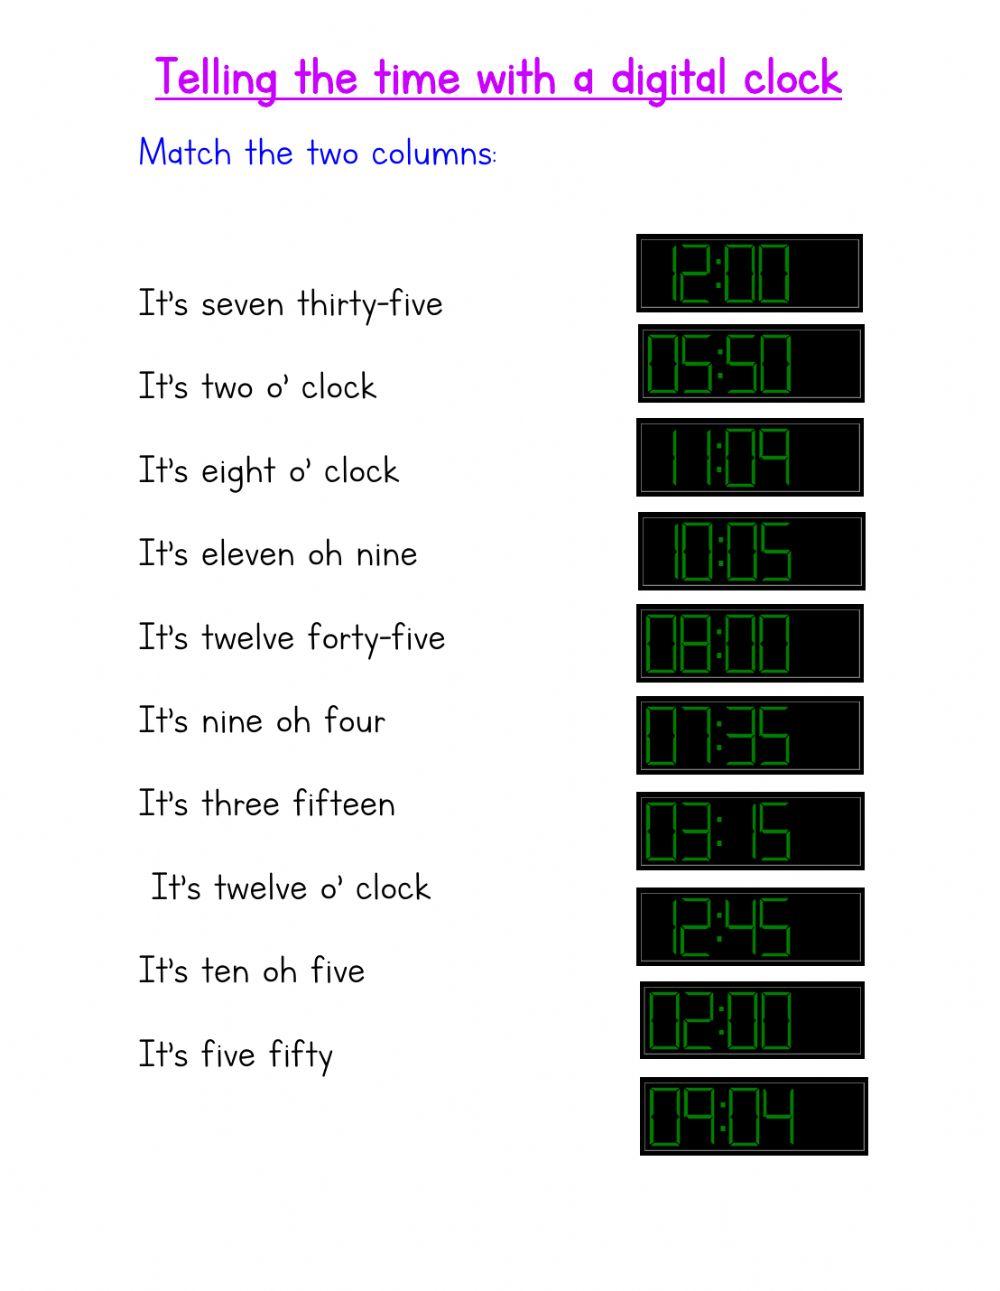 Telling the time with a digital clock